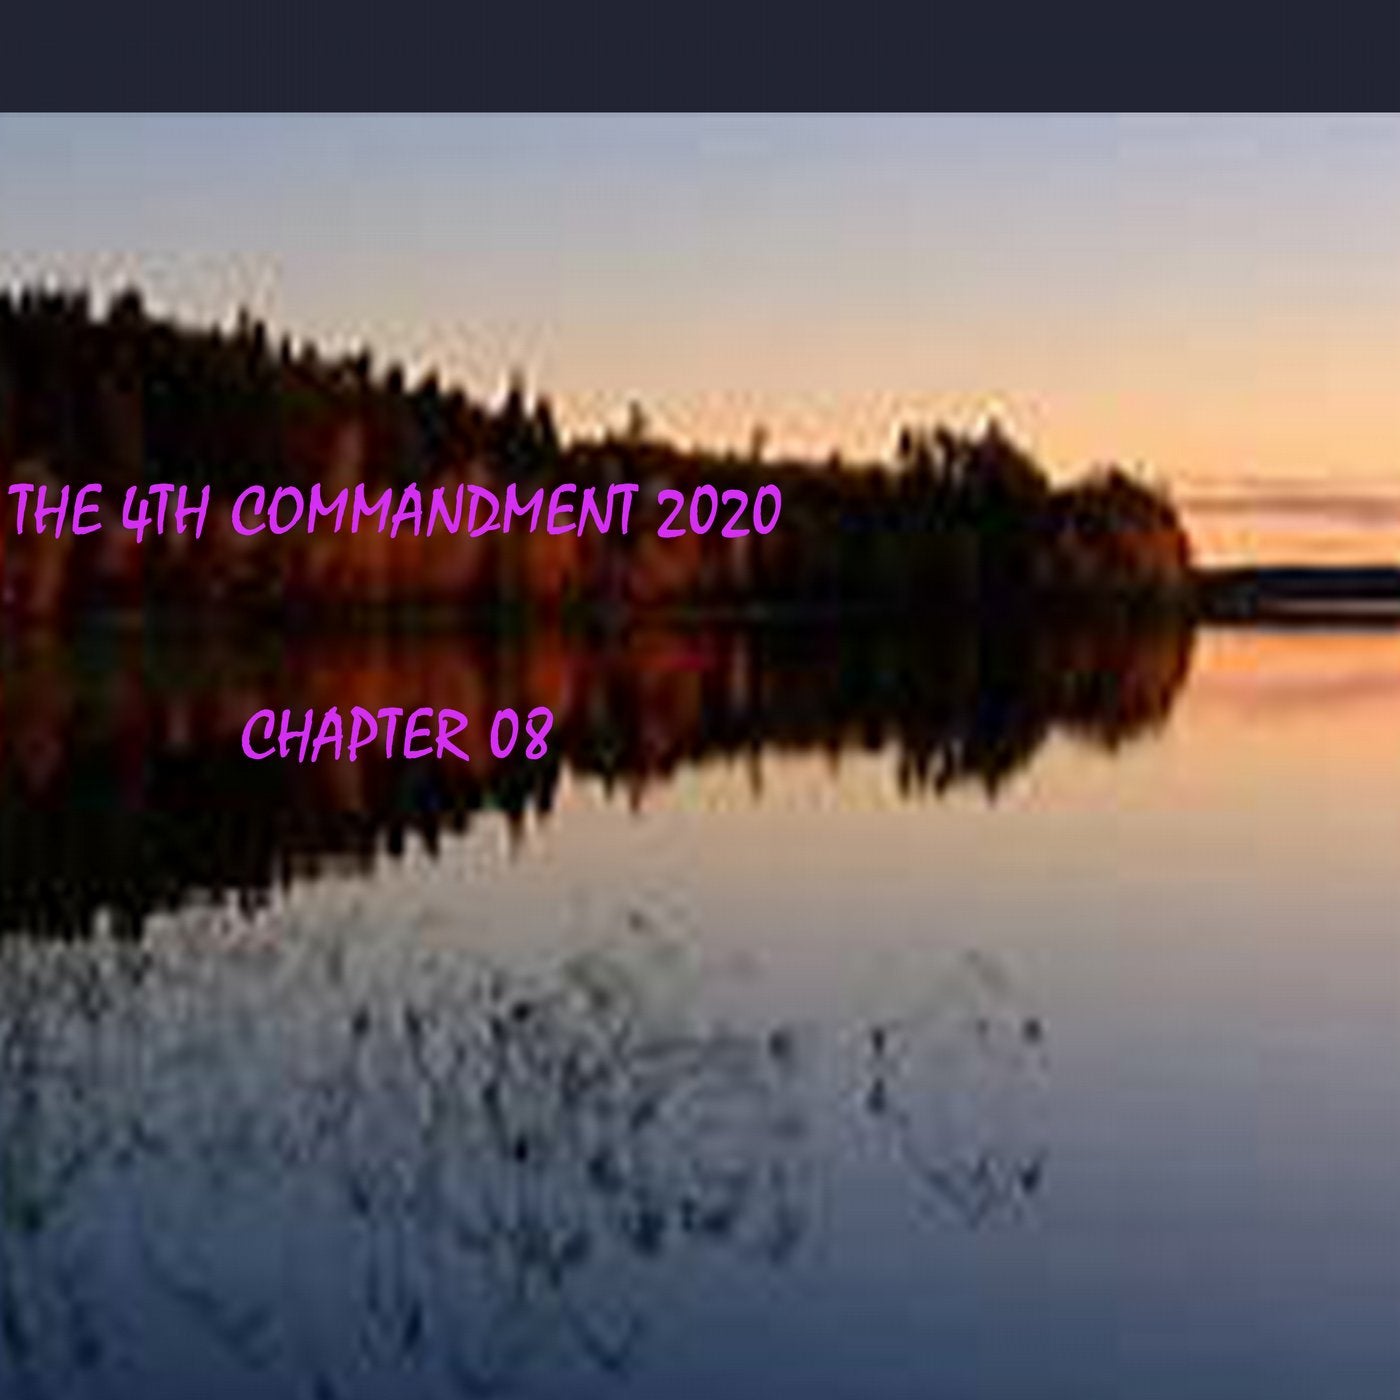 The 4th Commandment 2020 Chapter 08